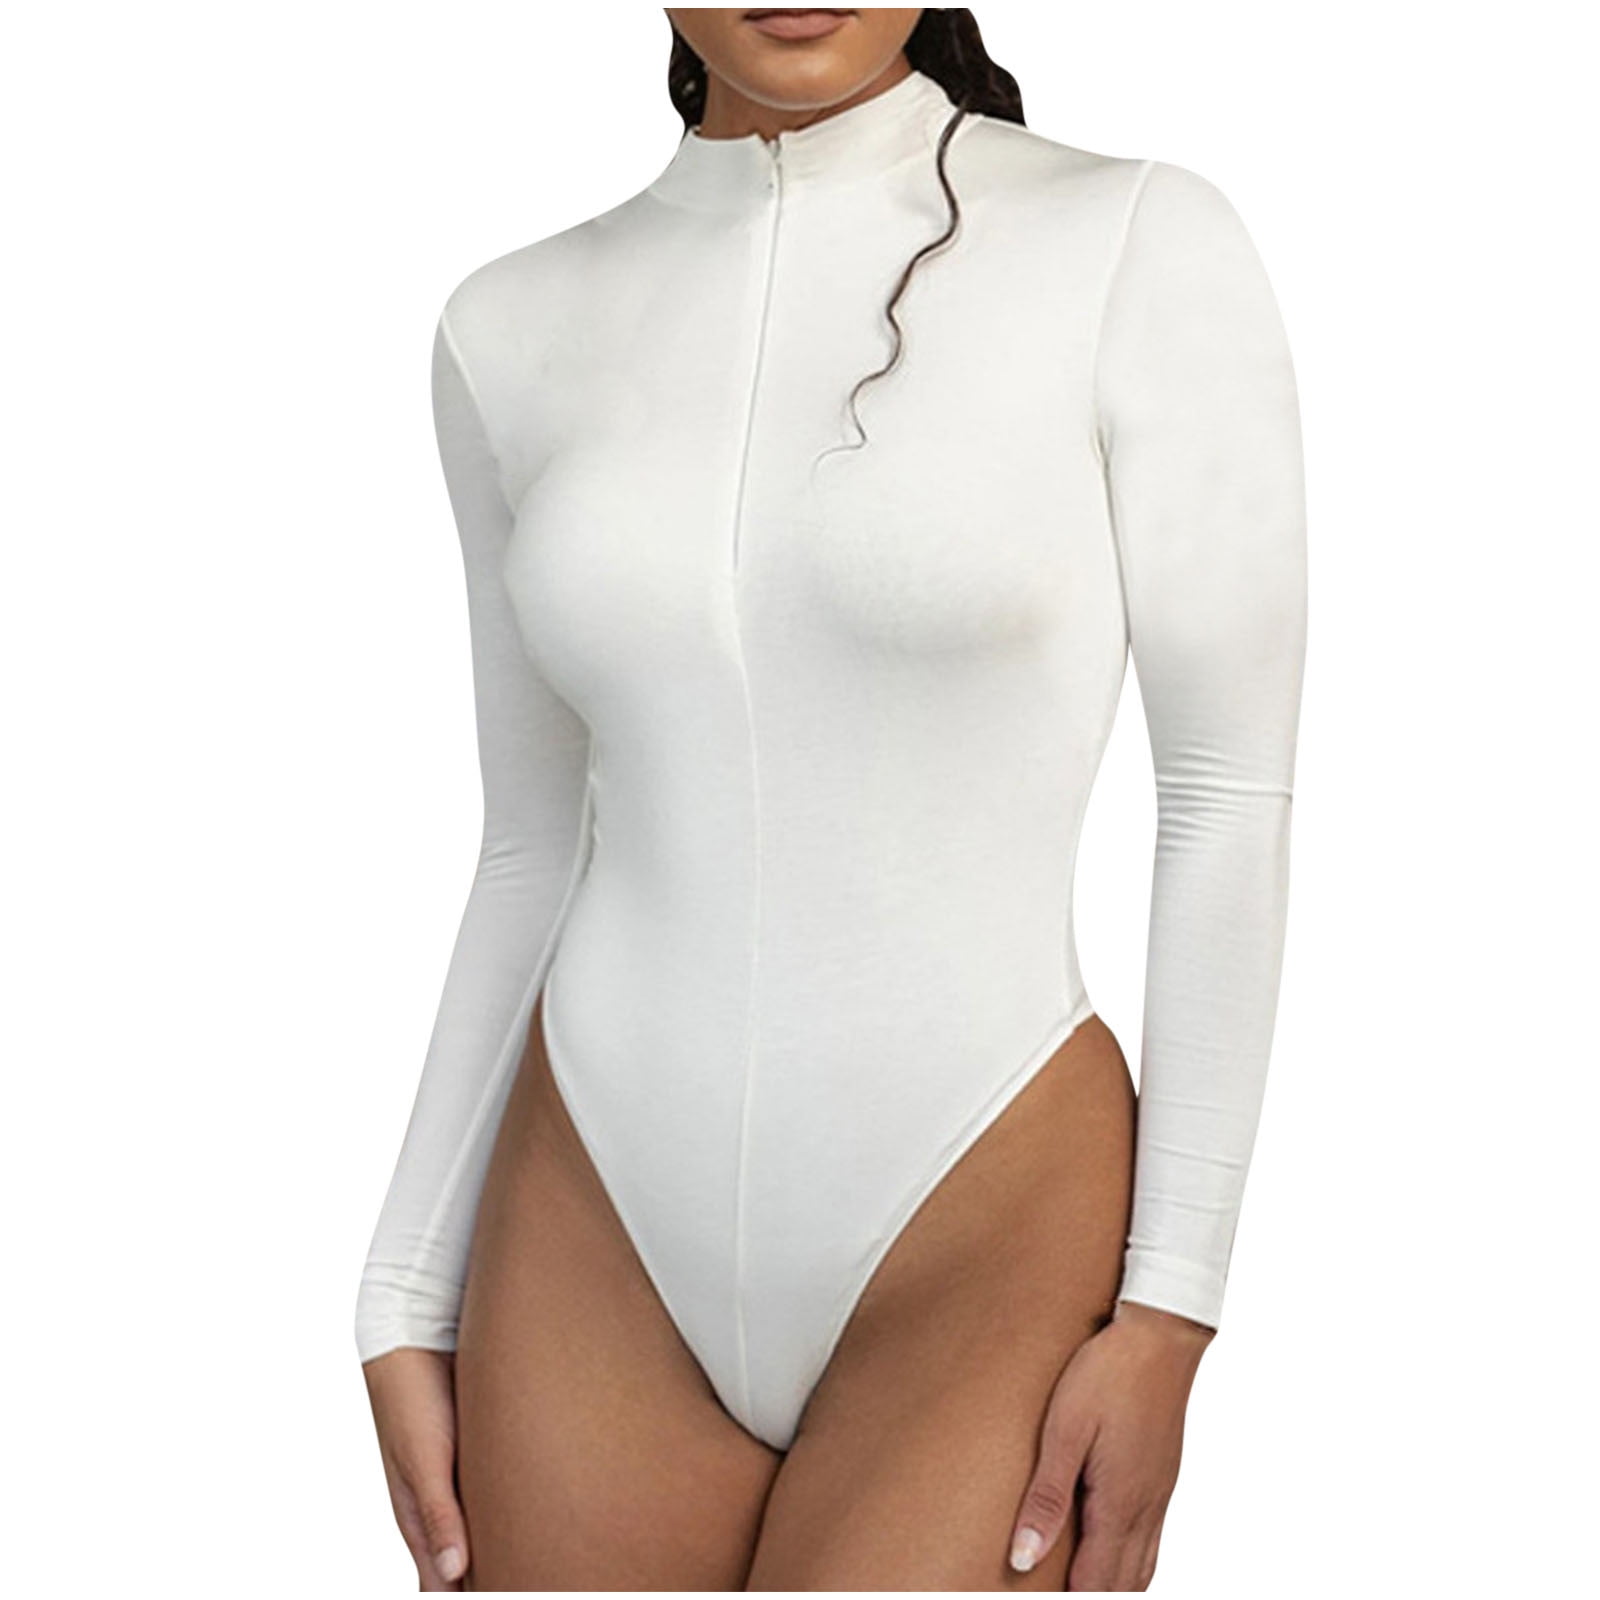 CLOZOZ Long Sleeve Bodysuit Shapewear Tummy Control Square Neck Seamless  Bodysuits for Women Ribbed Knit Body Suits - Coupon Codes, Promo Codes,  Daily Deals, Save Money Today